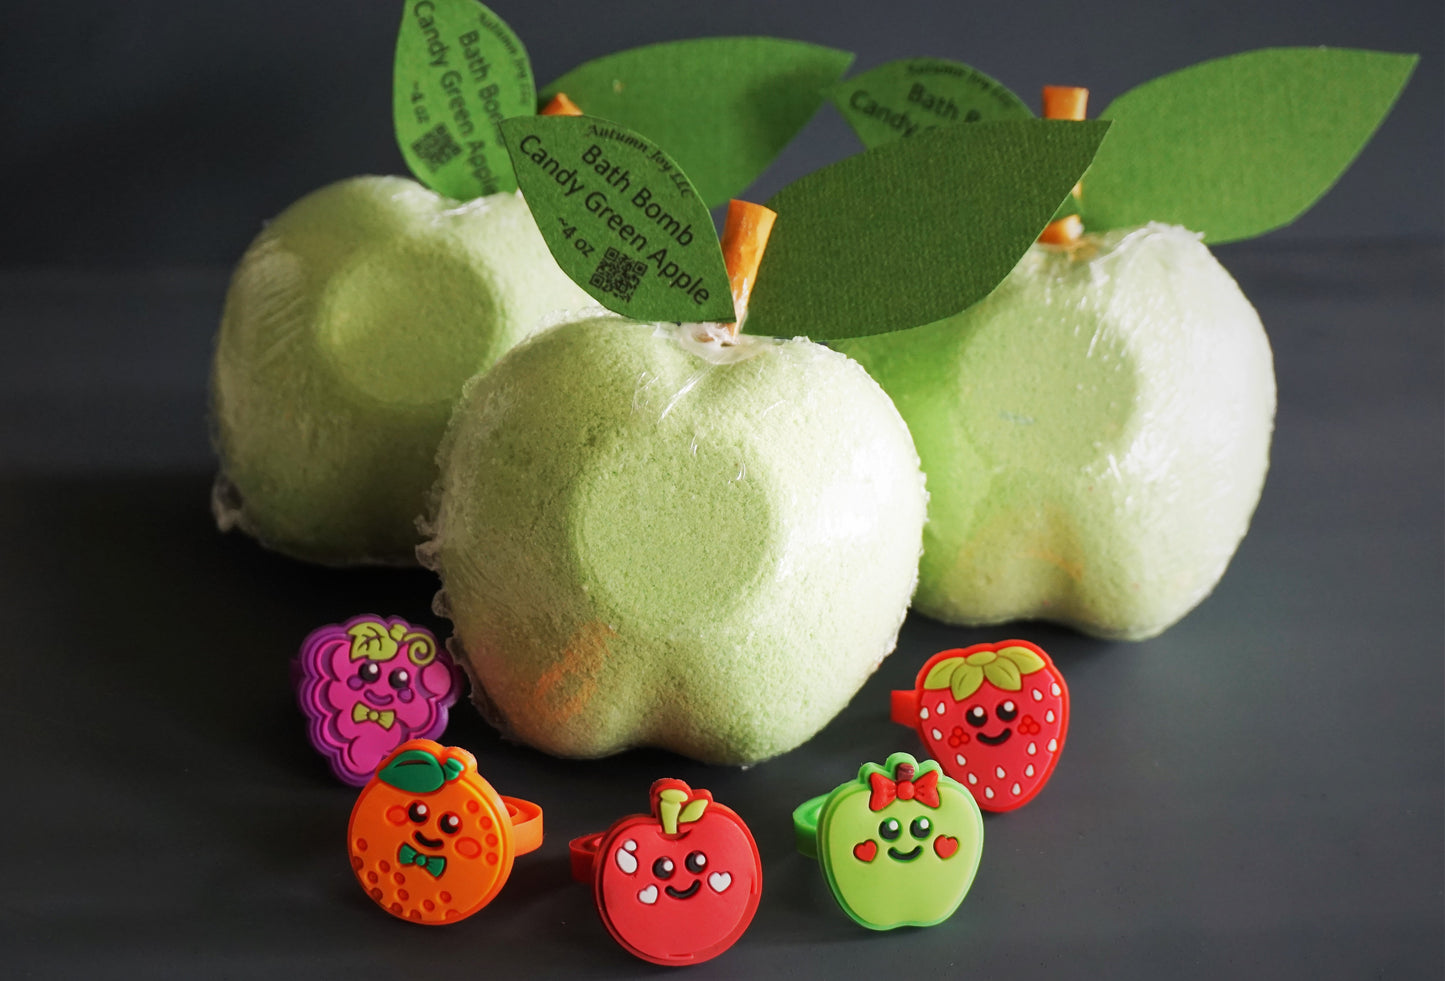 Candy Green Apple with “Fruit Ring Surprise” Fizzy, Foamy Bath Bombs